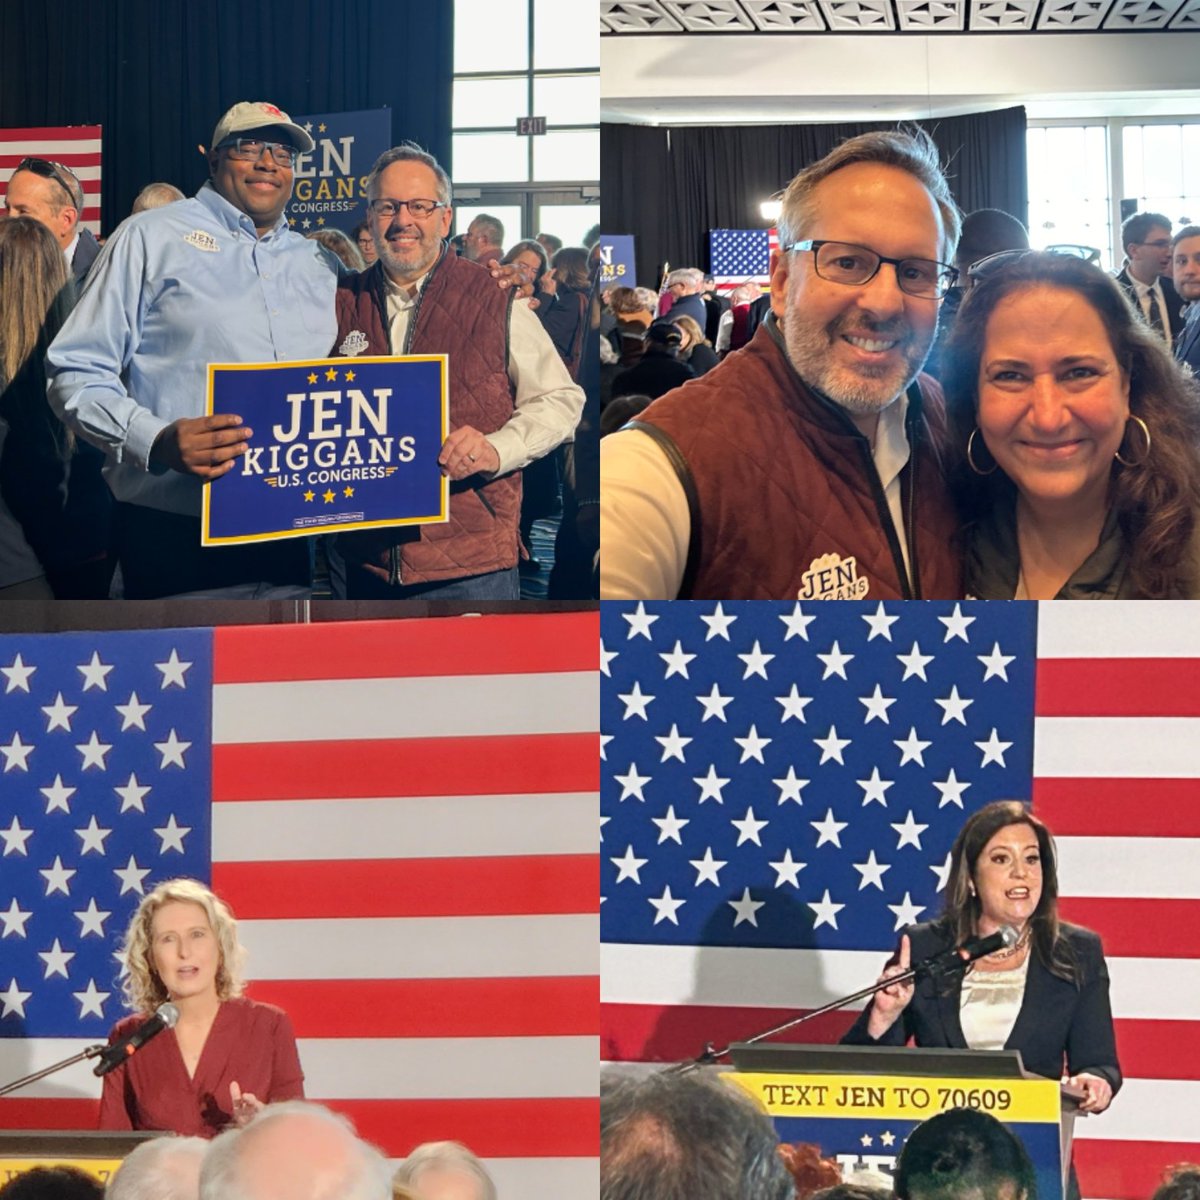 Chelle and I joined a packed house today for @RepJenKiggans re-election kickoff with @EliseStefanik in Virginia Beach.